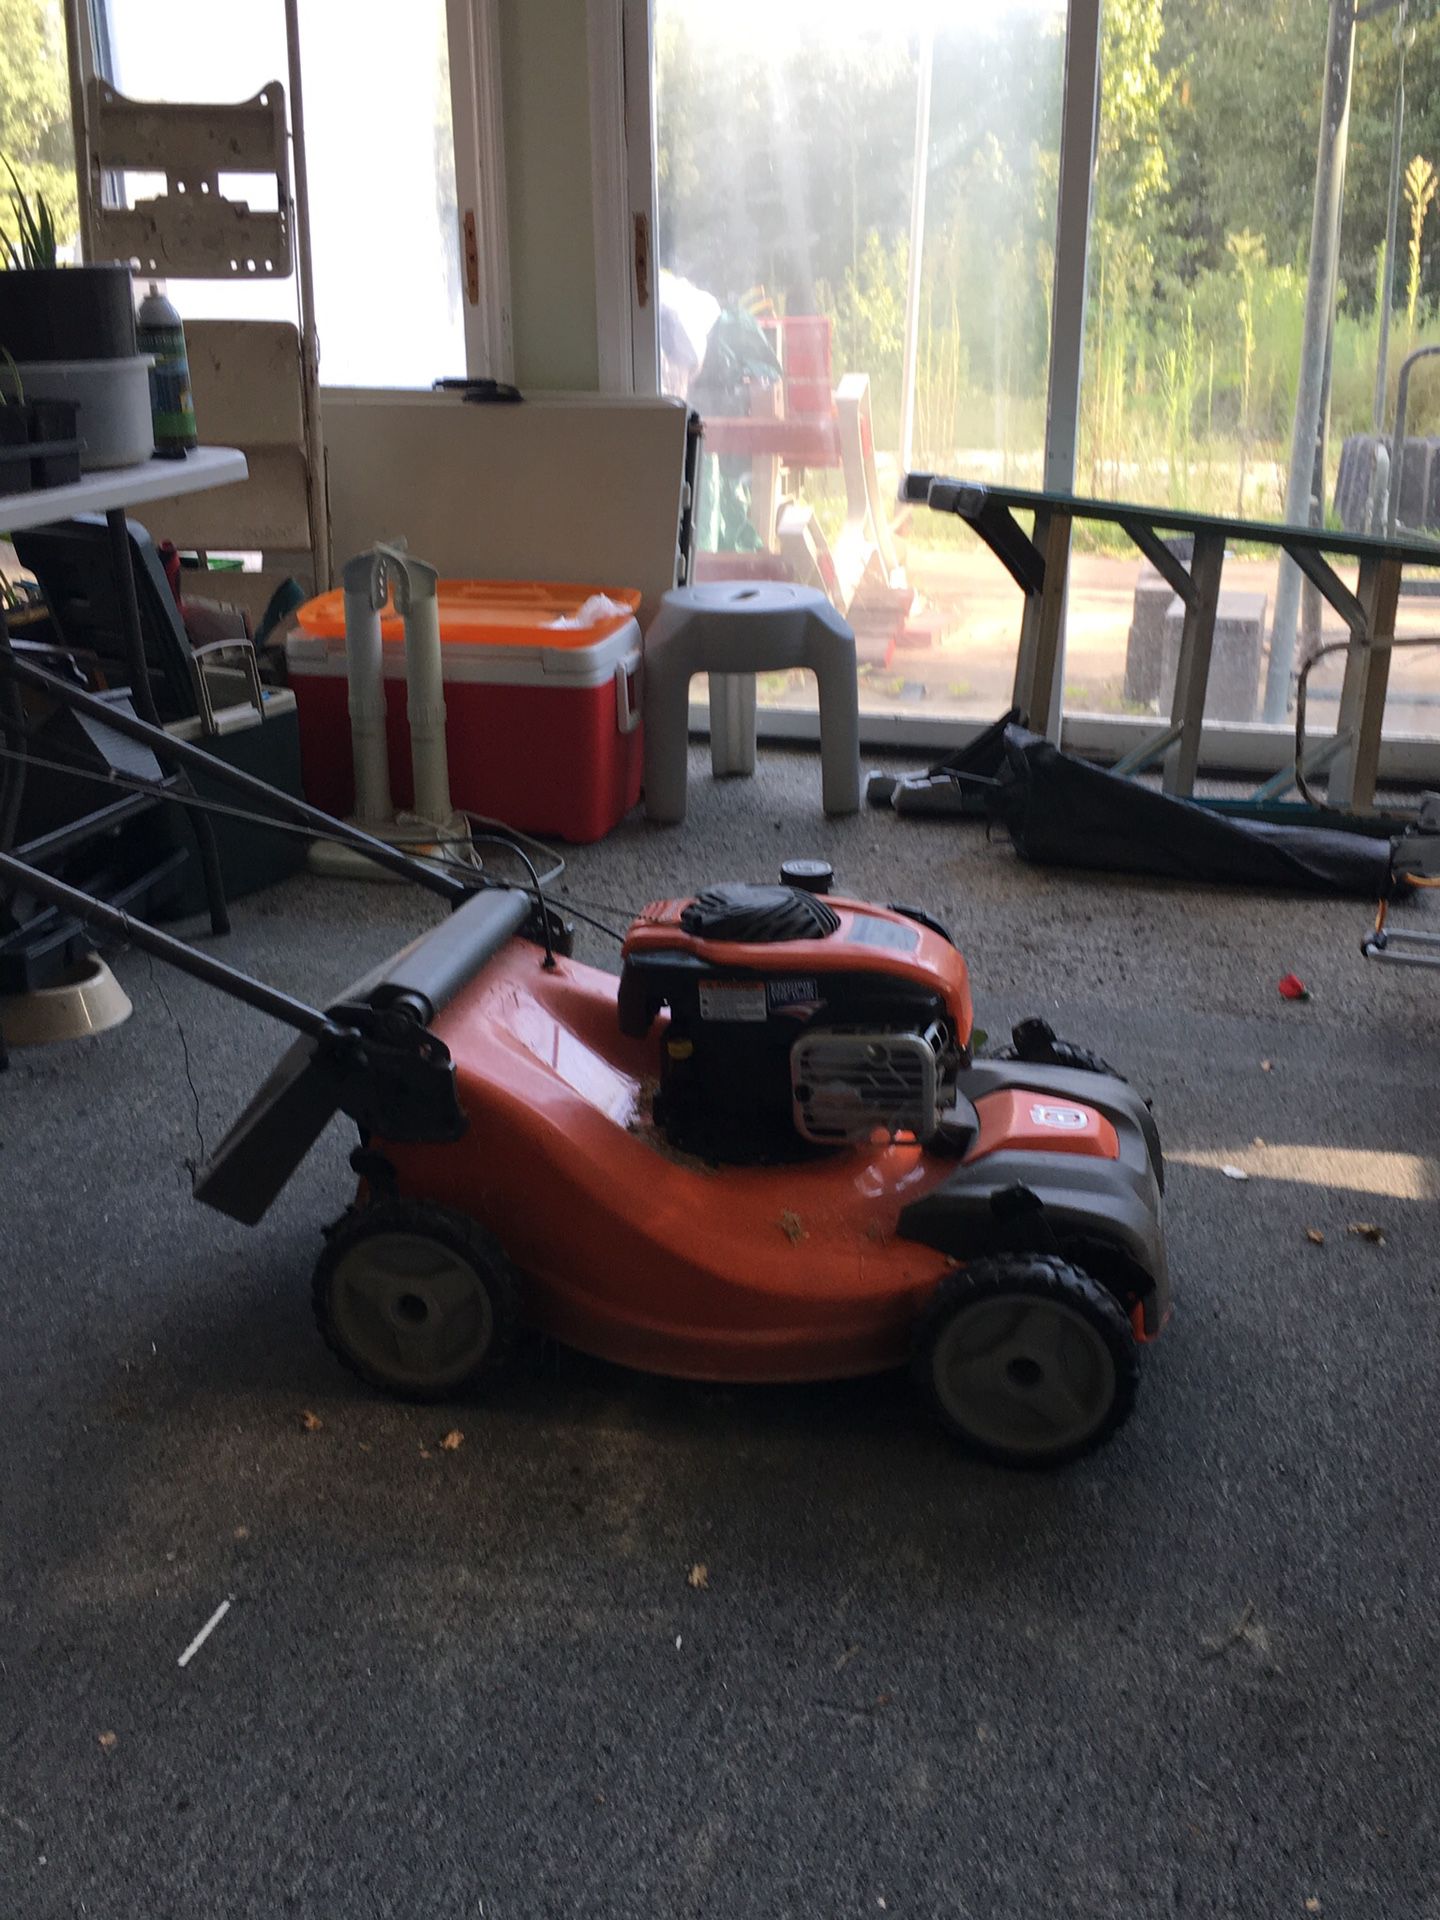 Husqvarna, self perpelled mower with Briggs and Stratton motor 6.25.ex serious, has bagged, only one year old my brother passed and i dont need it,